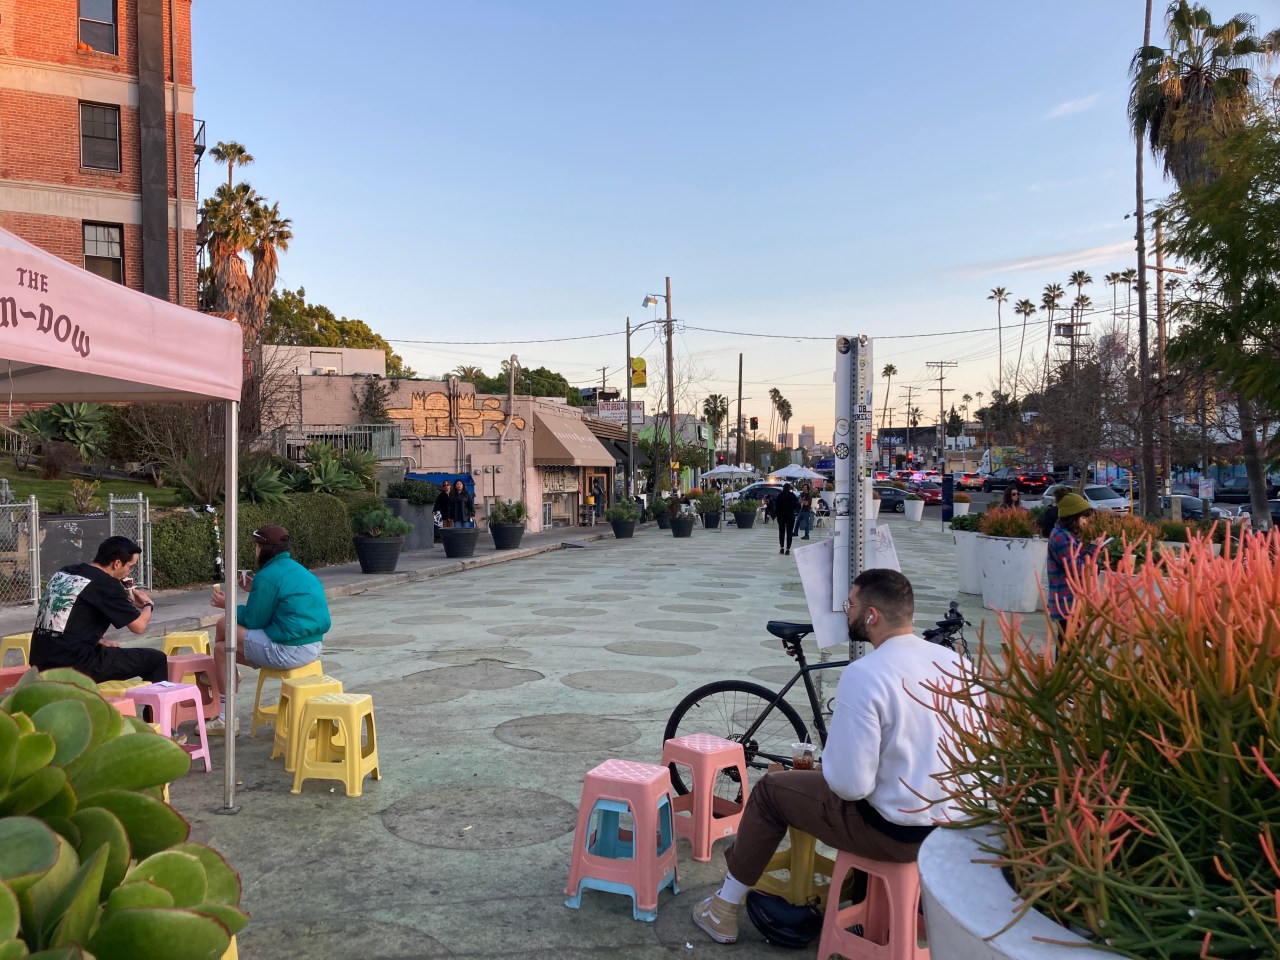 pedestrianized Griffith Park Boulevard in Silver Lake. Photo: John Greenfield